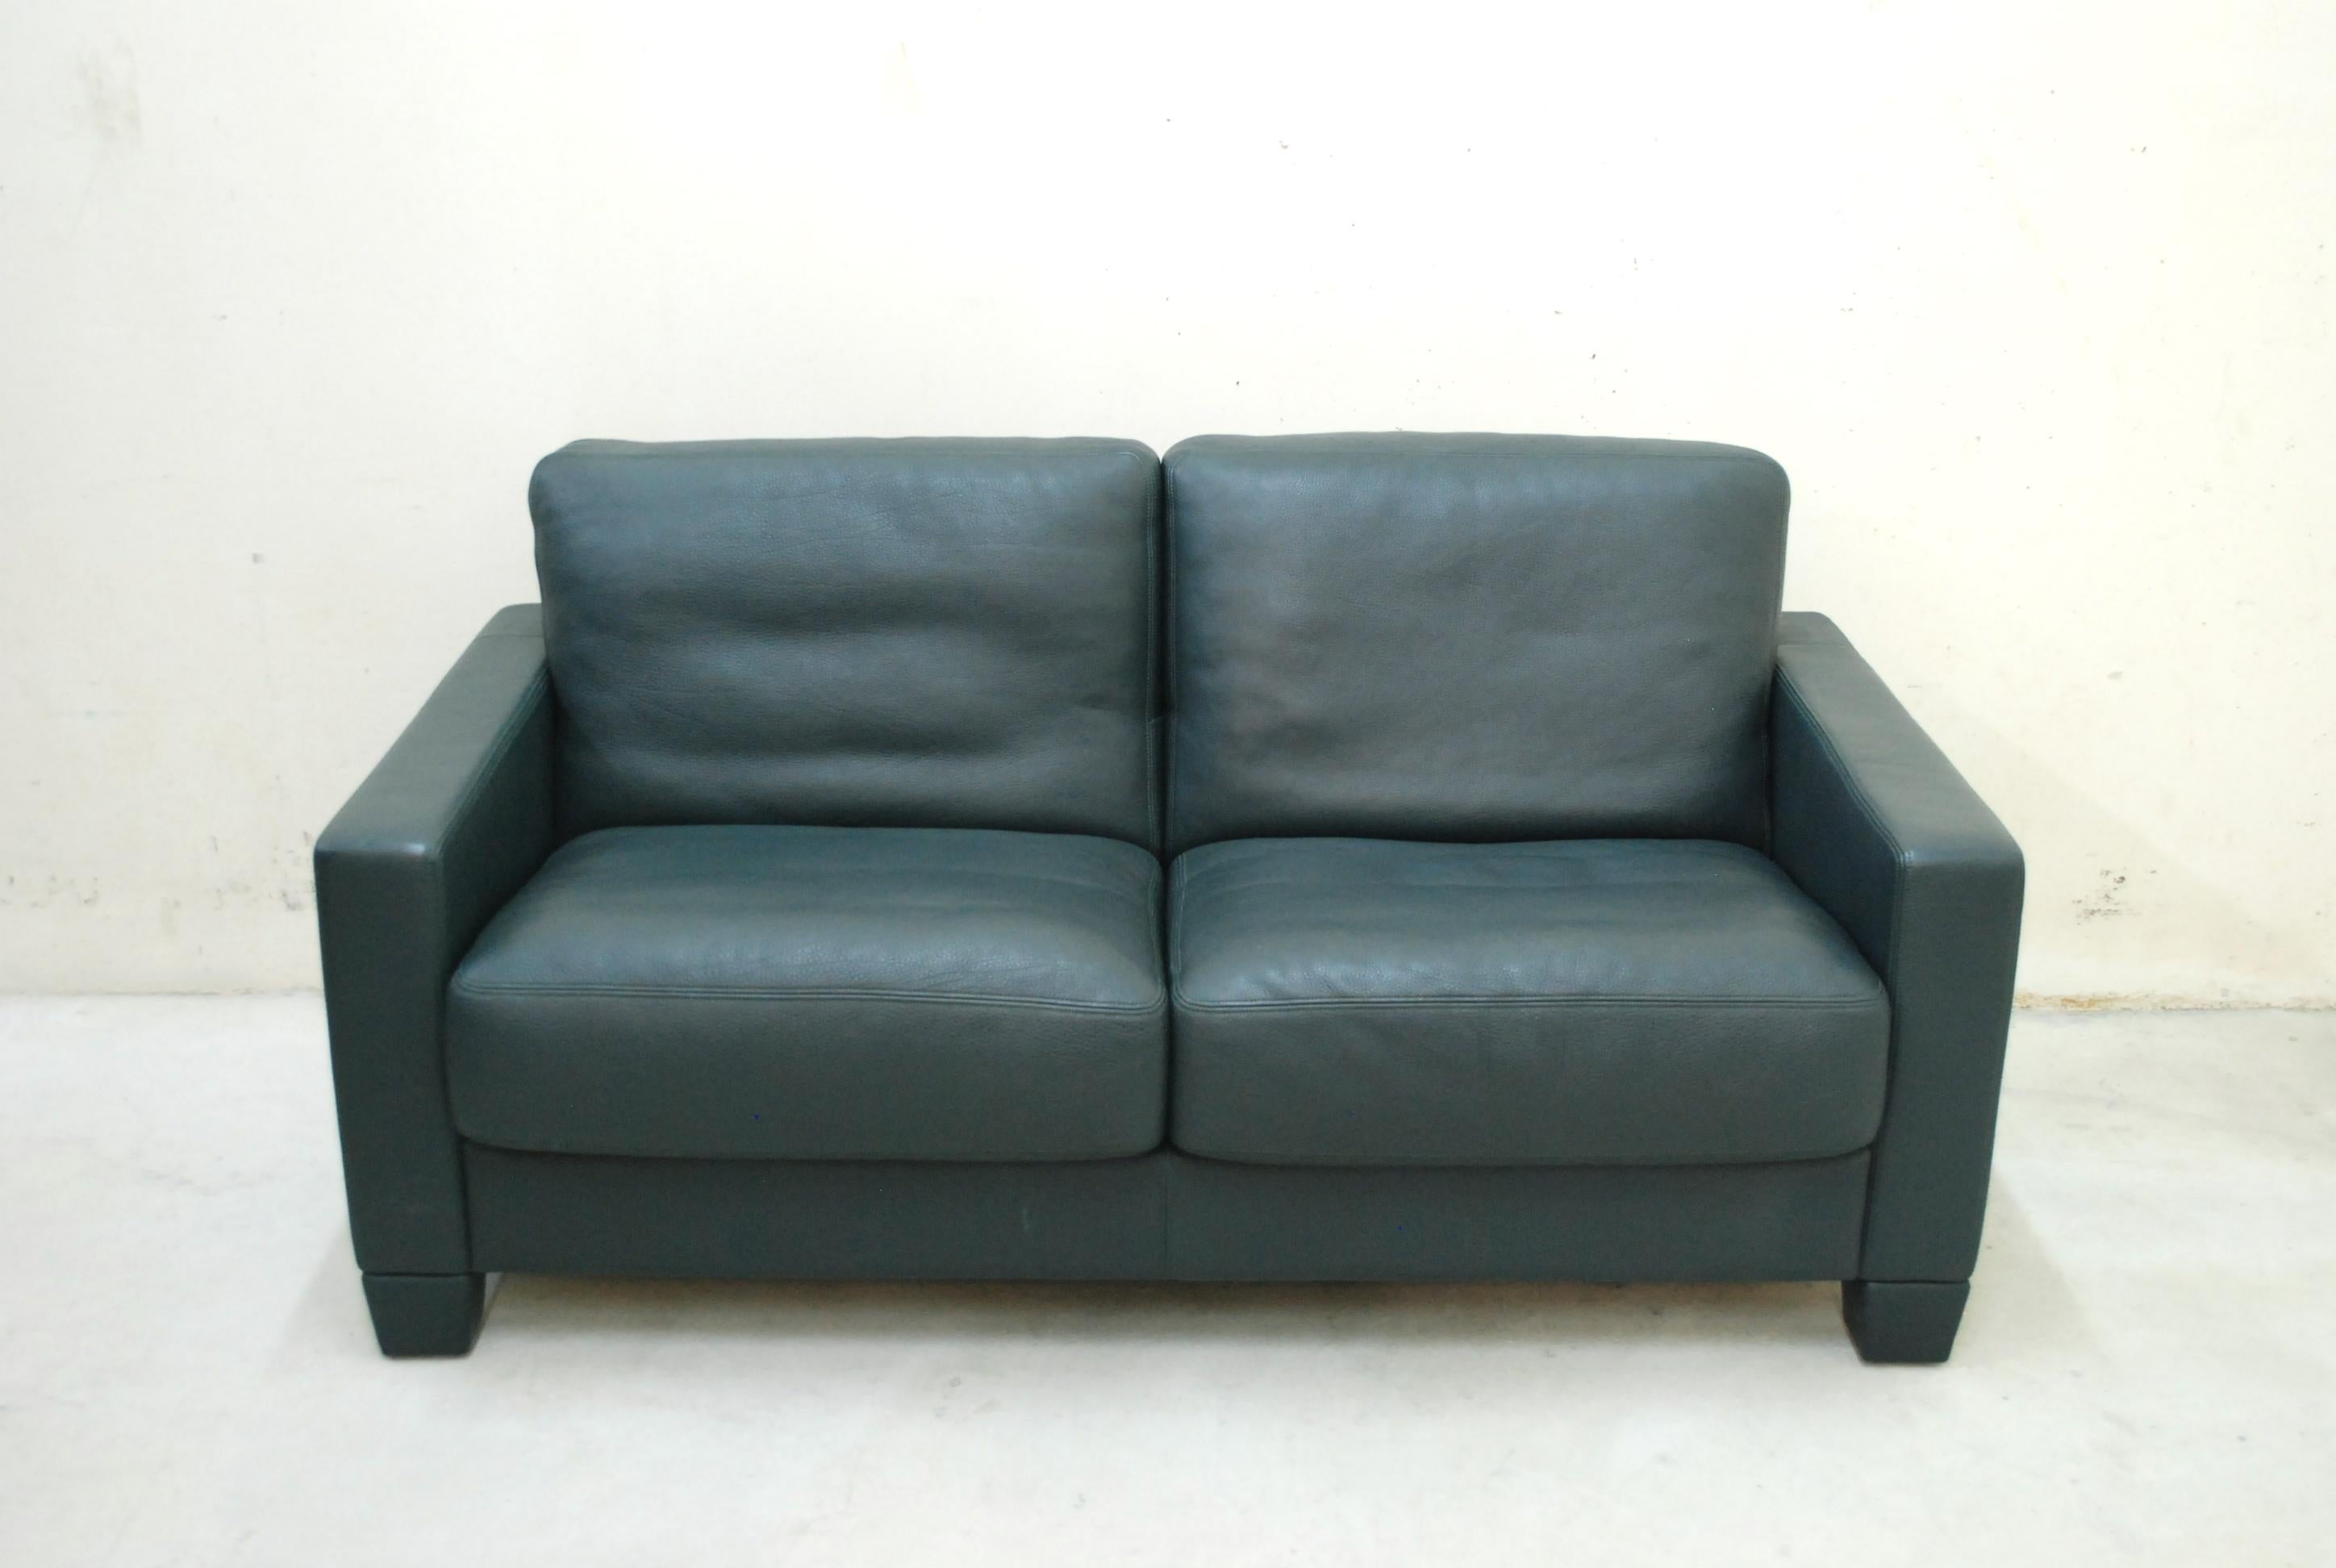 De Sede leather sofa model DS 17.
The leather is the DS club leather a thick Semianiline leather in racing green colour.
Great comfort and a classic timeless design by De Sede.
In a very good condition.
 

